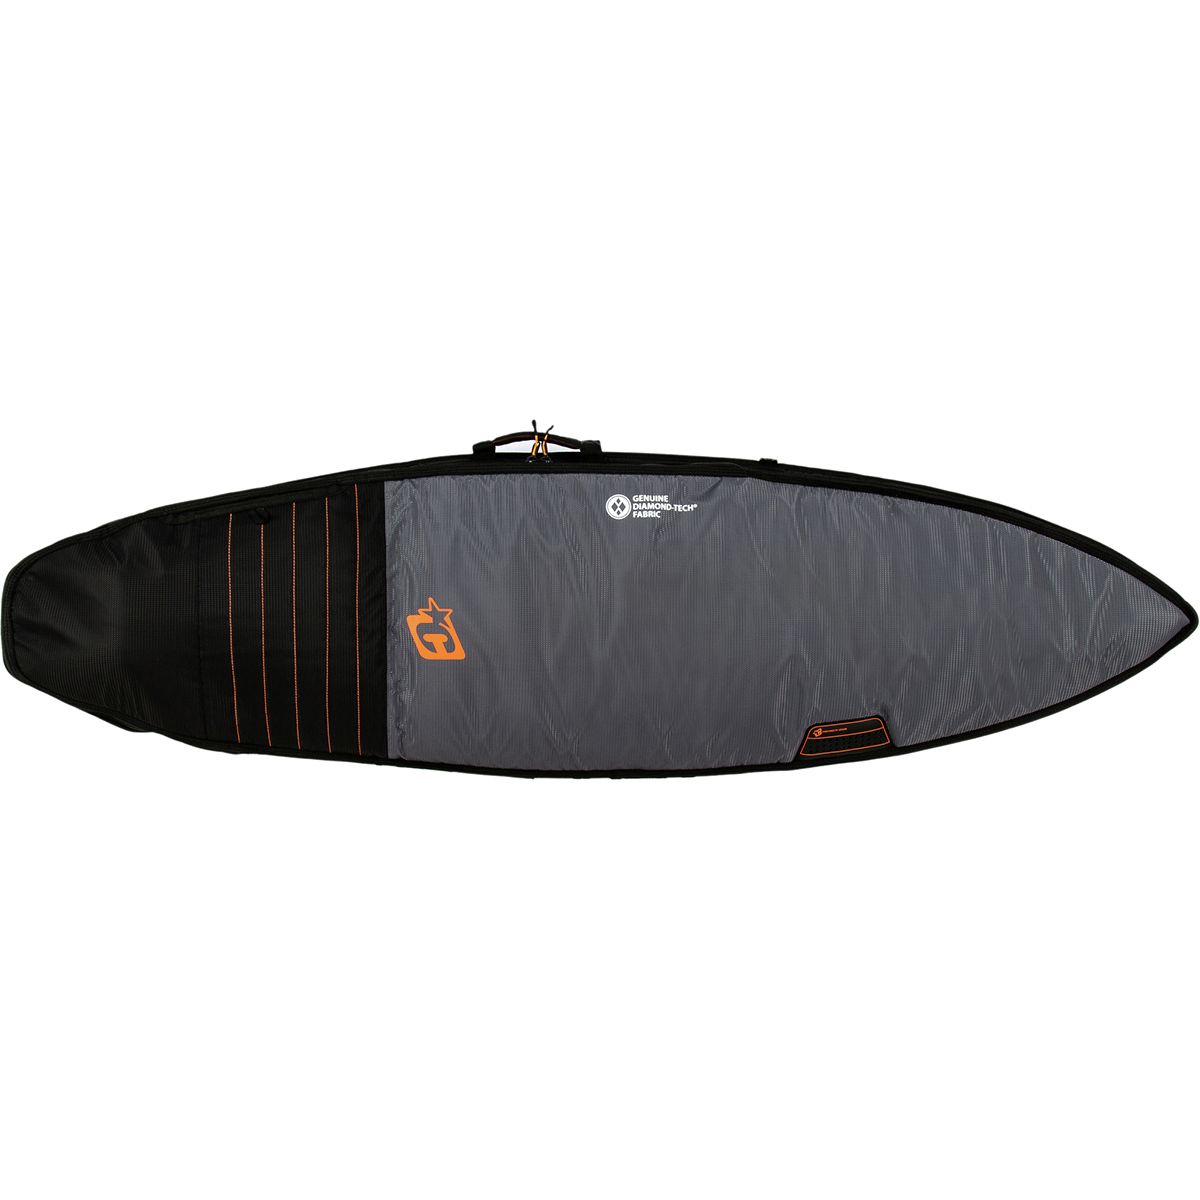 creatures of leisure surfboard travel bag